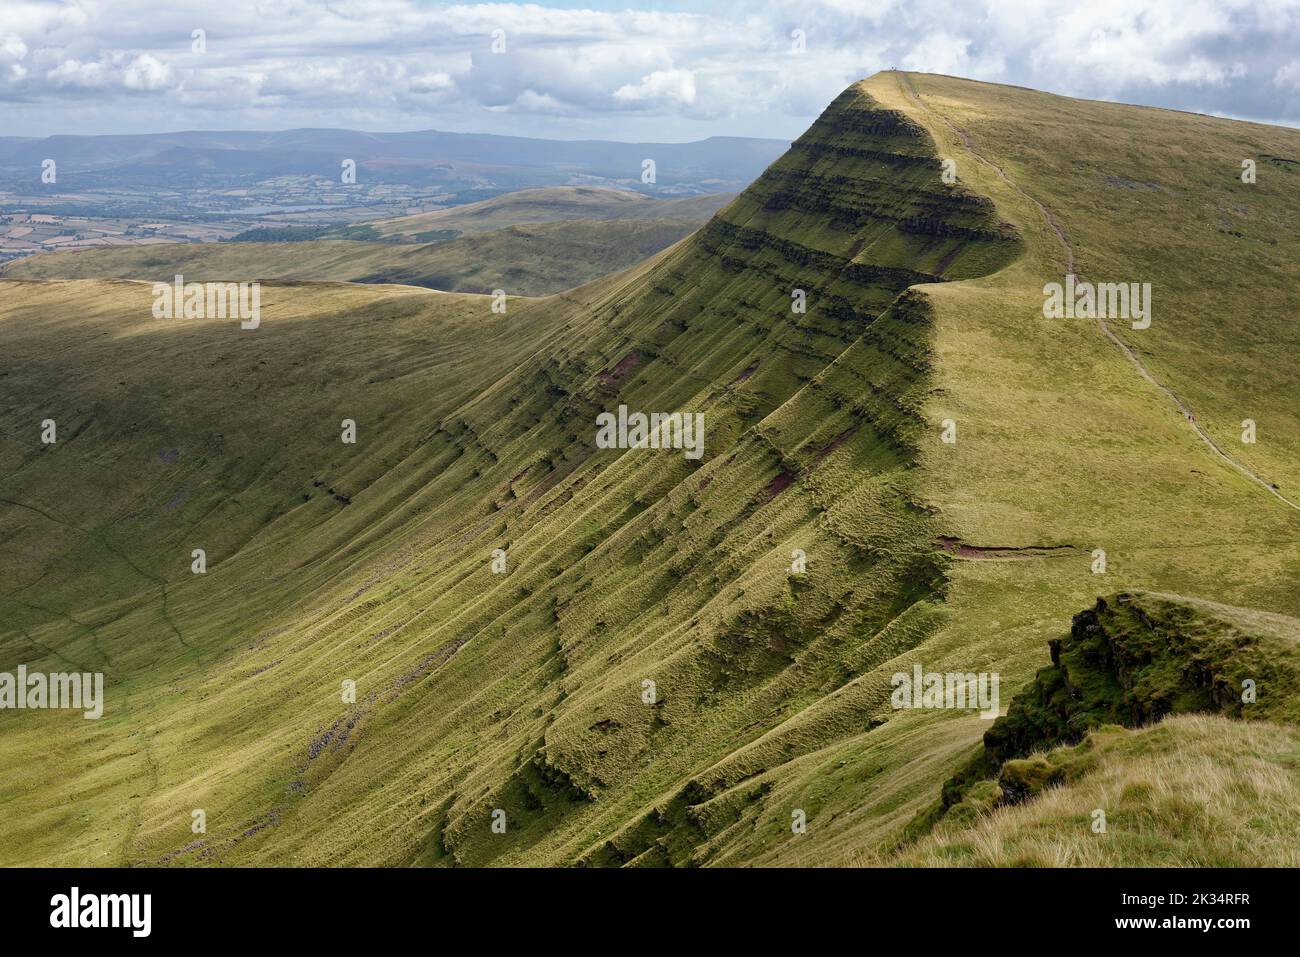 Cribyn and Bryn Teg viewed from Pen y Fan, Brecon Beacons, Powys, Wales, UK Stock Photo